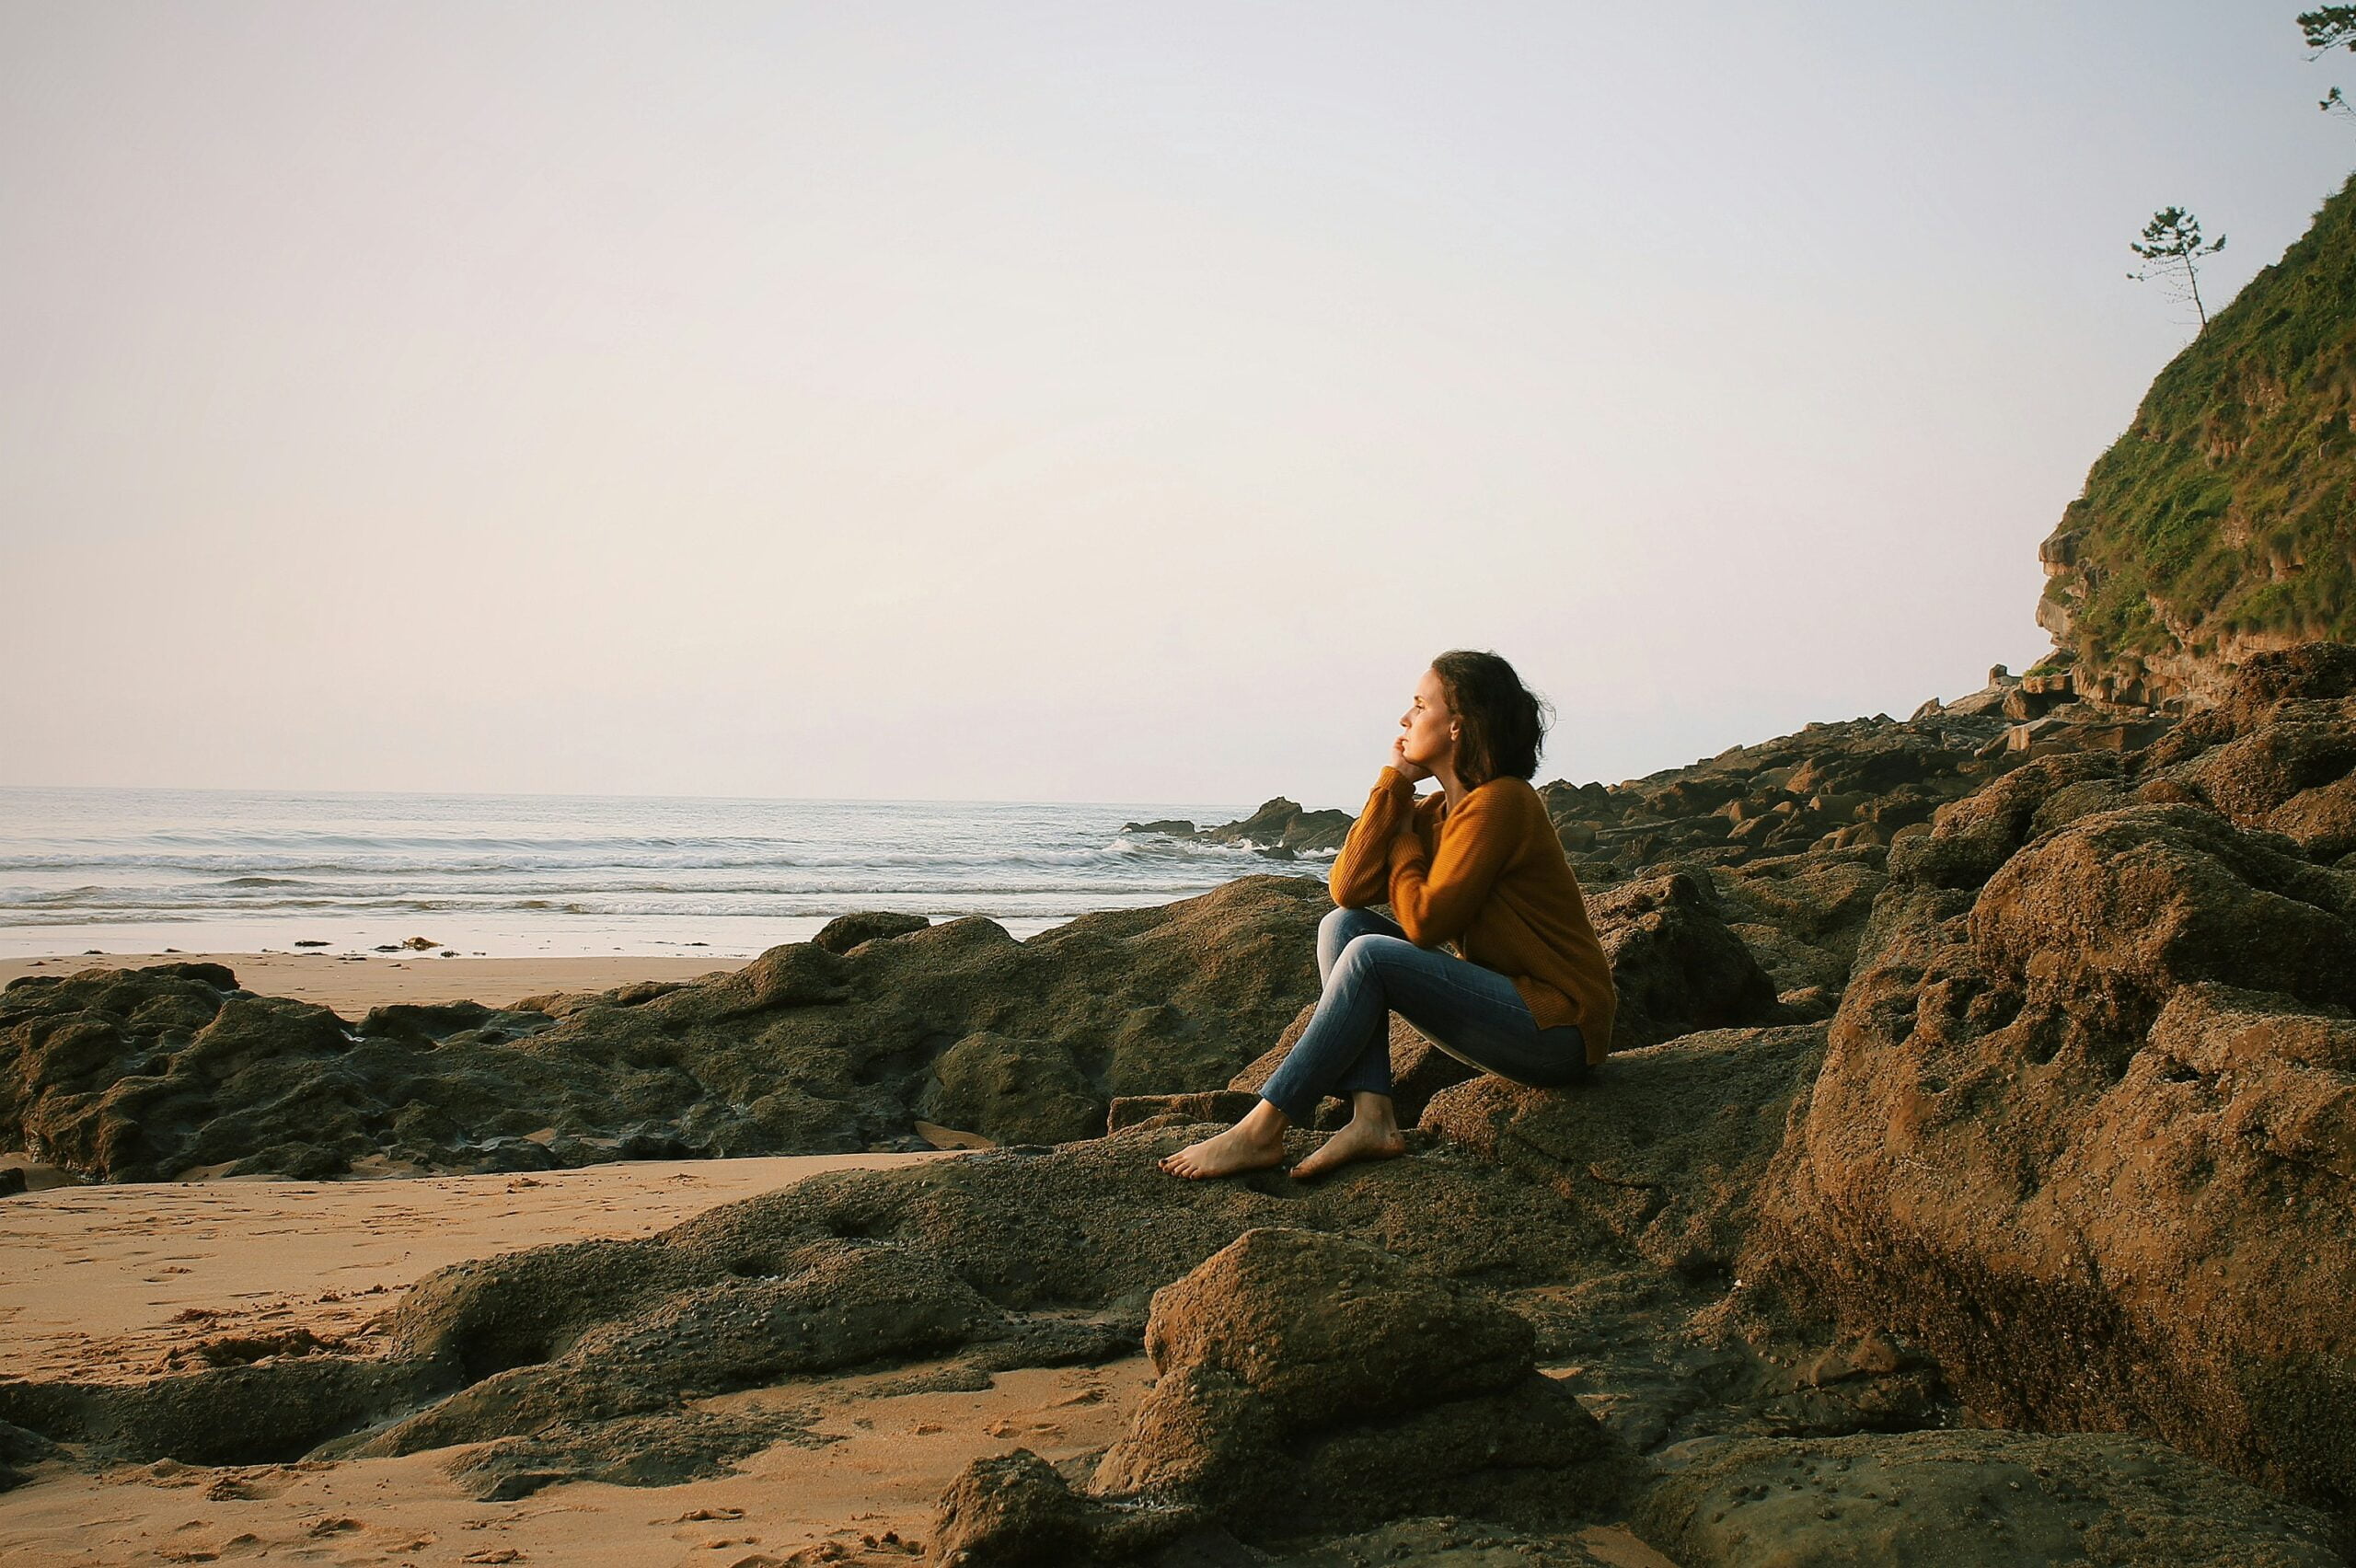 Thoughts, woman sitting near sea during daytime